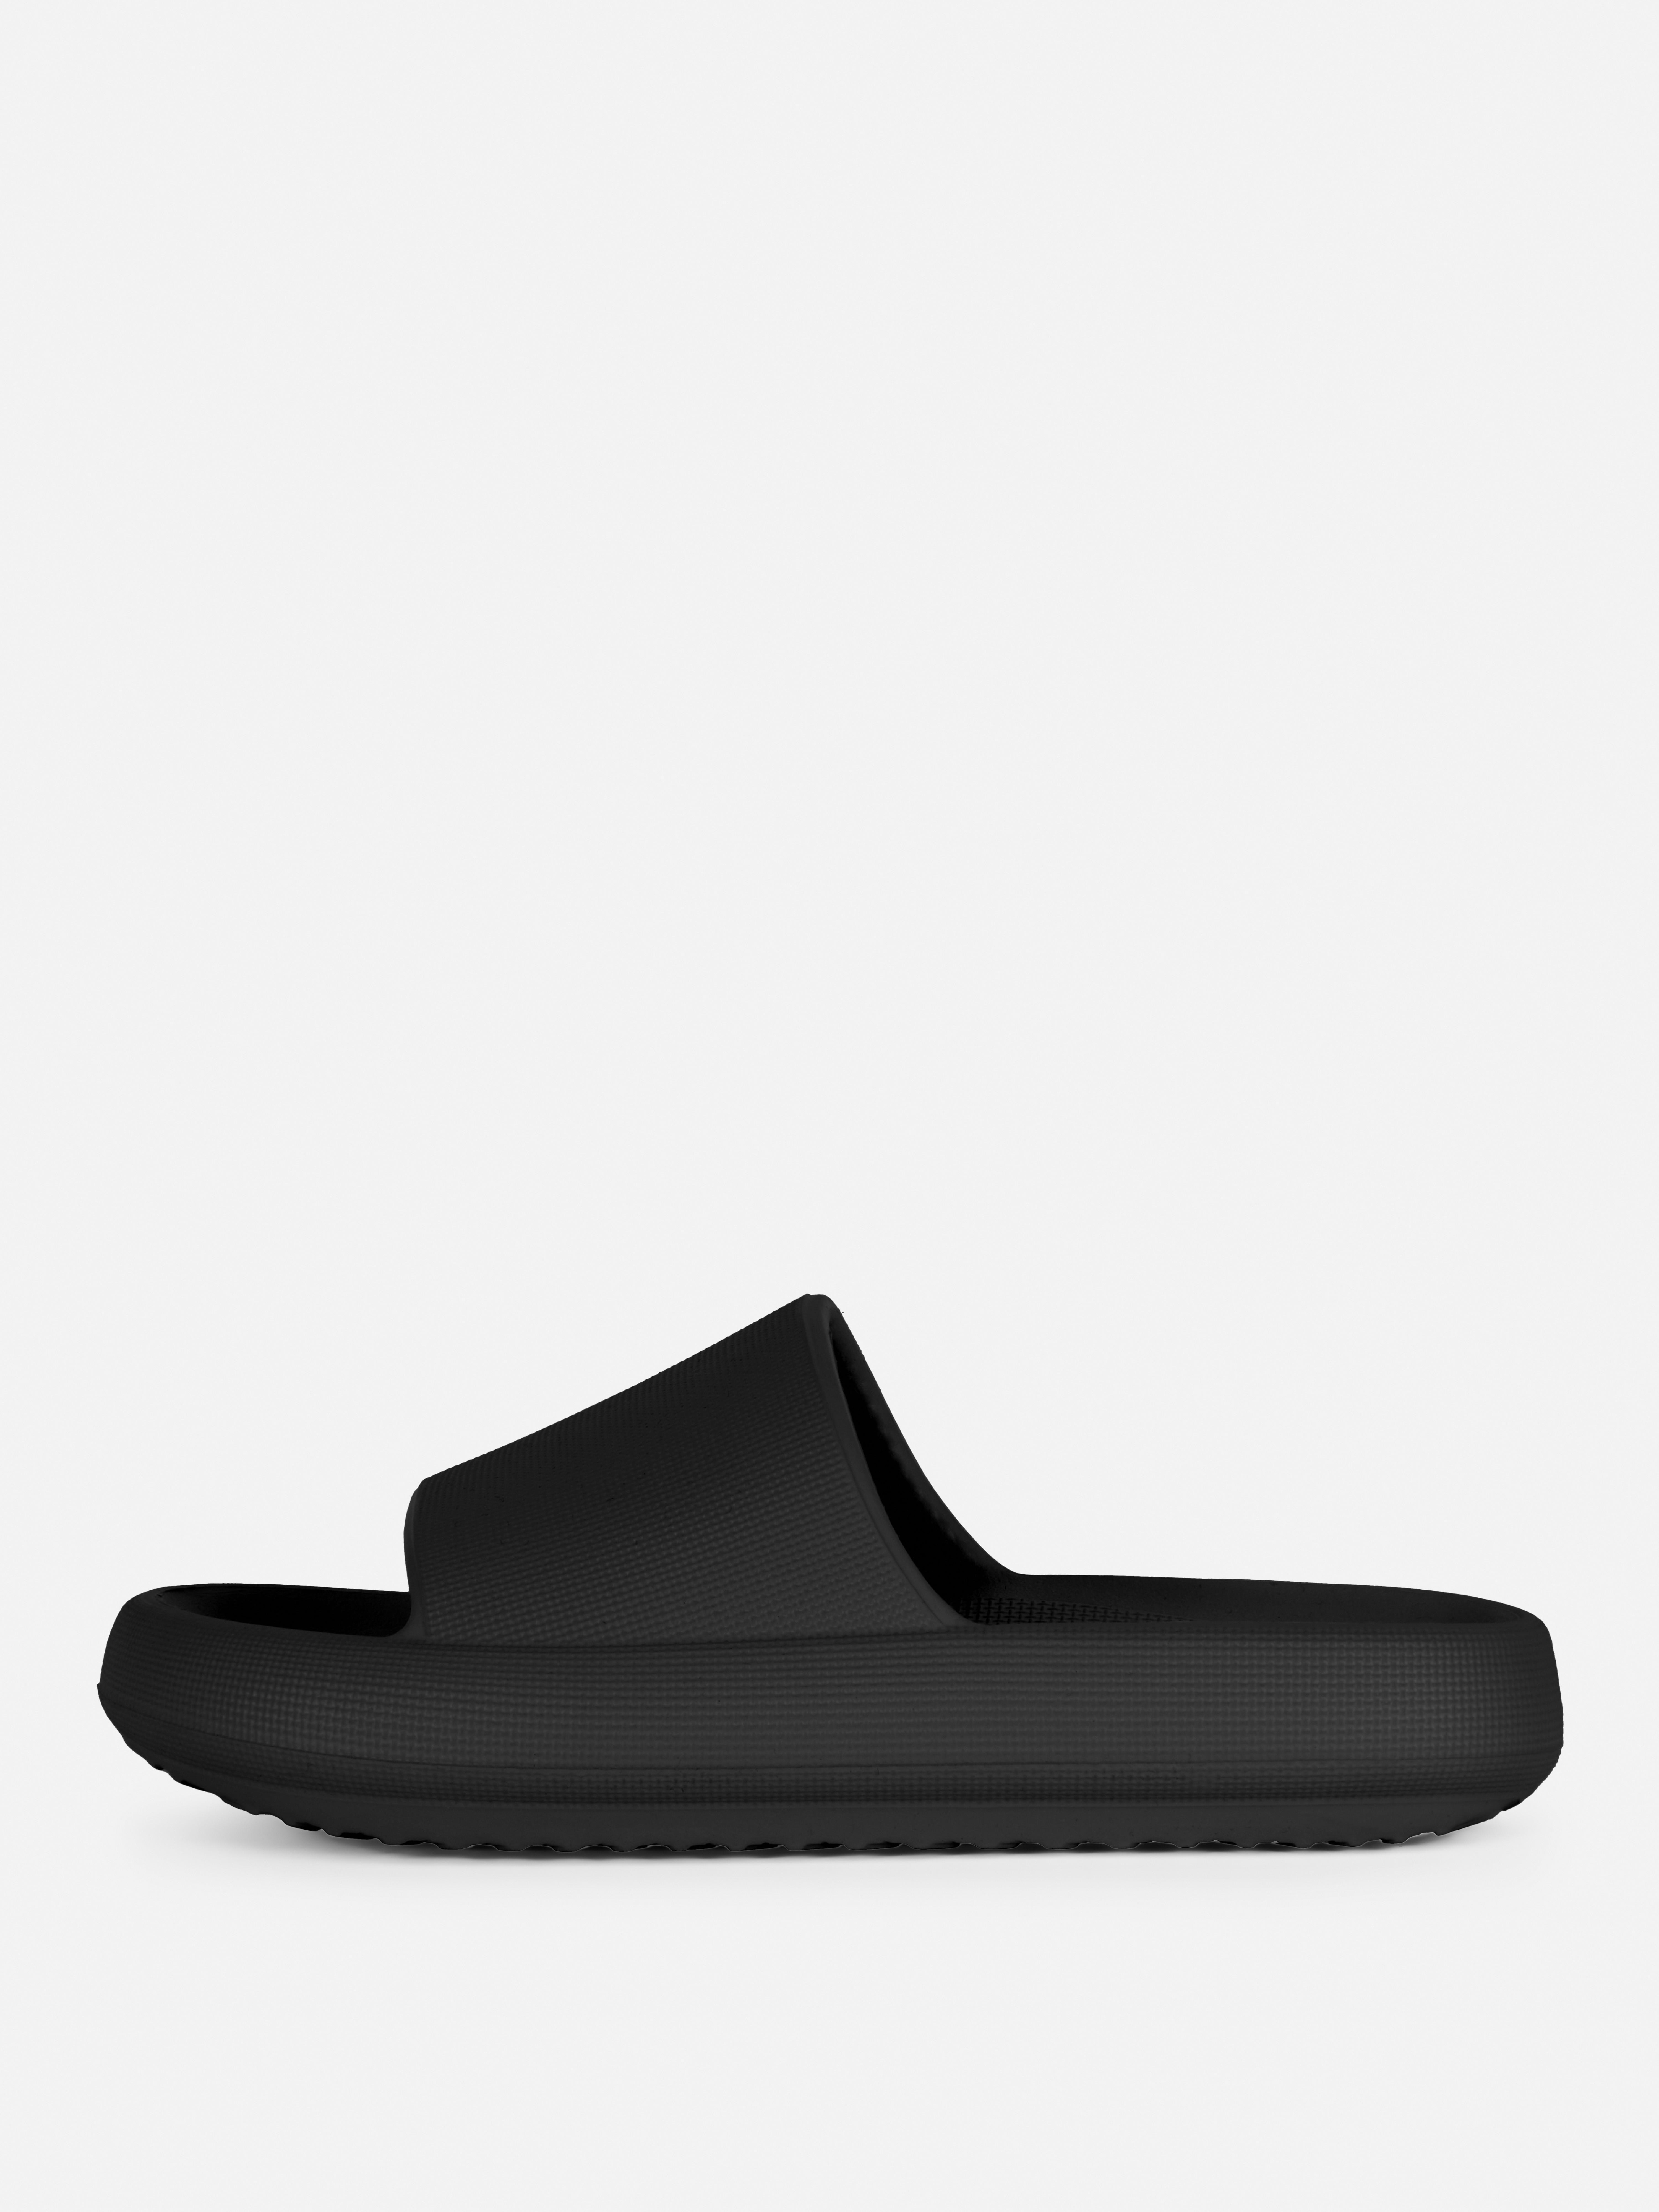 GREGGS X PRIMARK Black Sliders Size UK 9/10 L Brand New With Tags